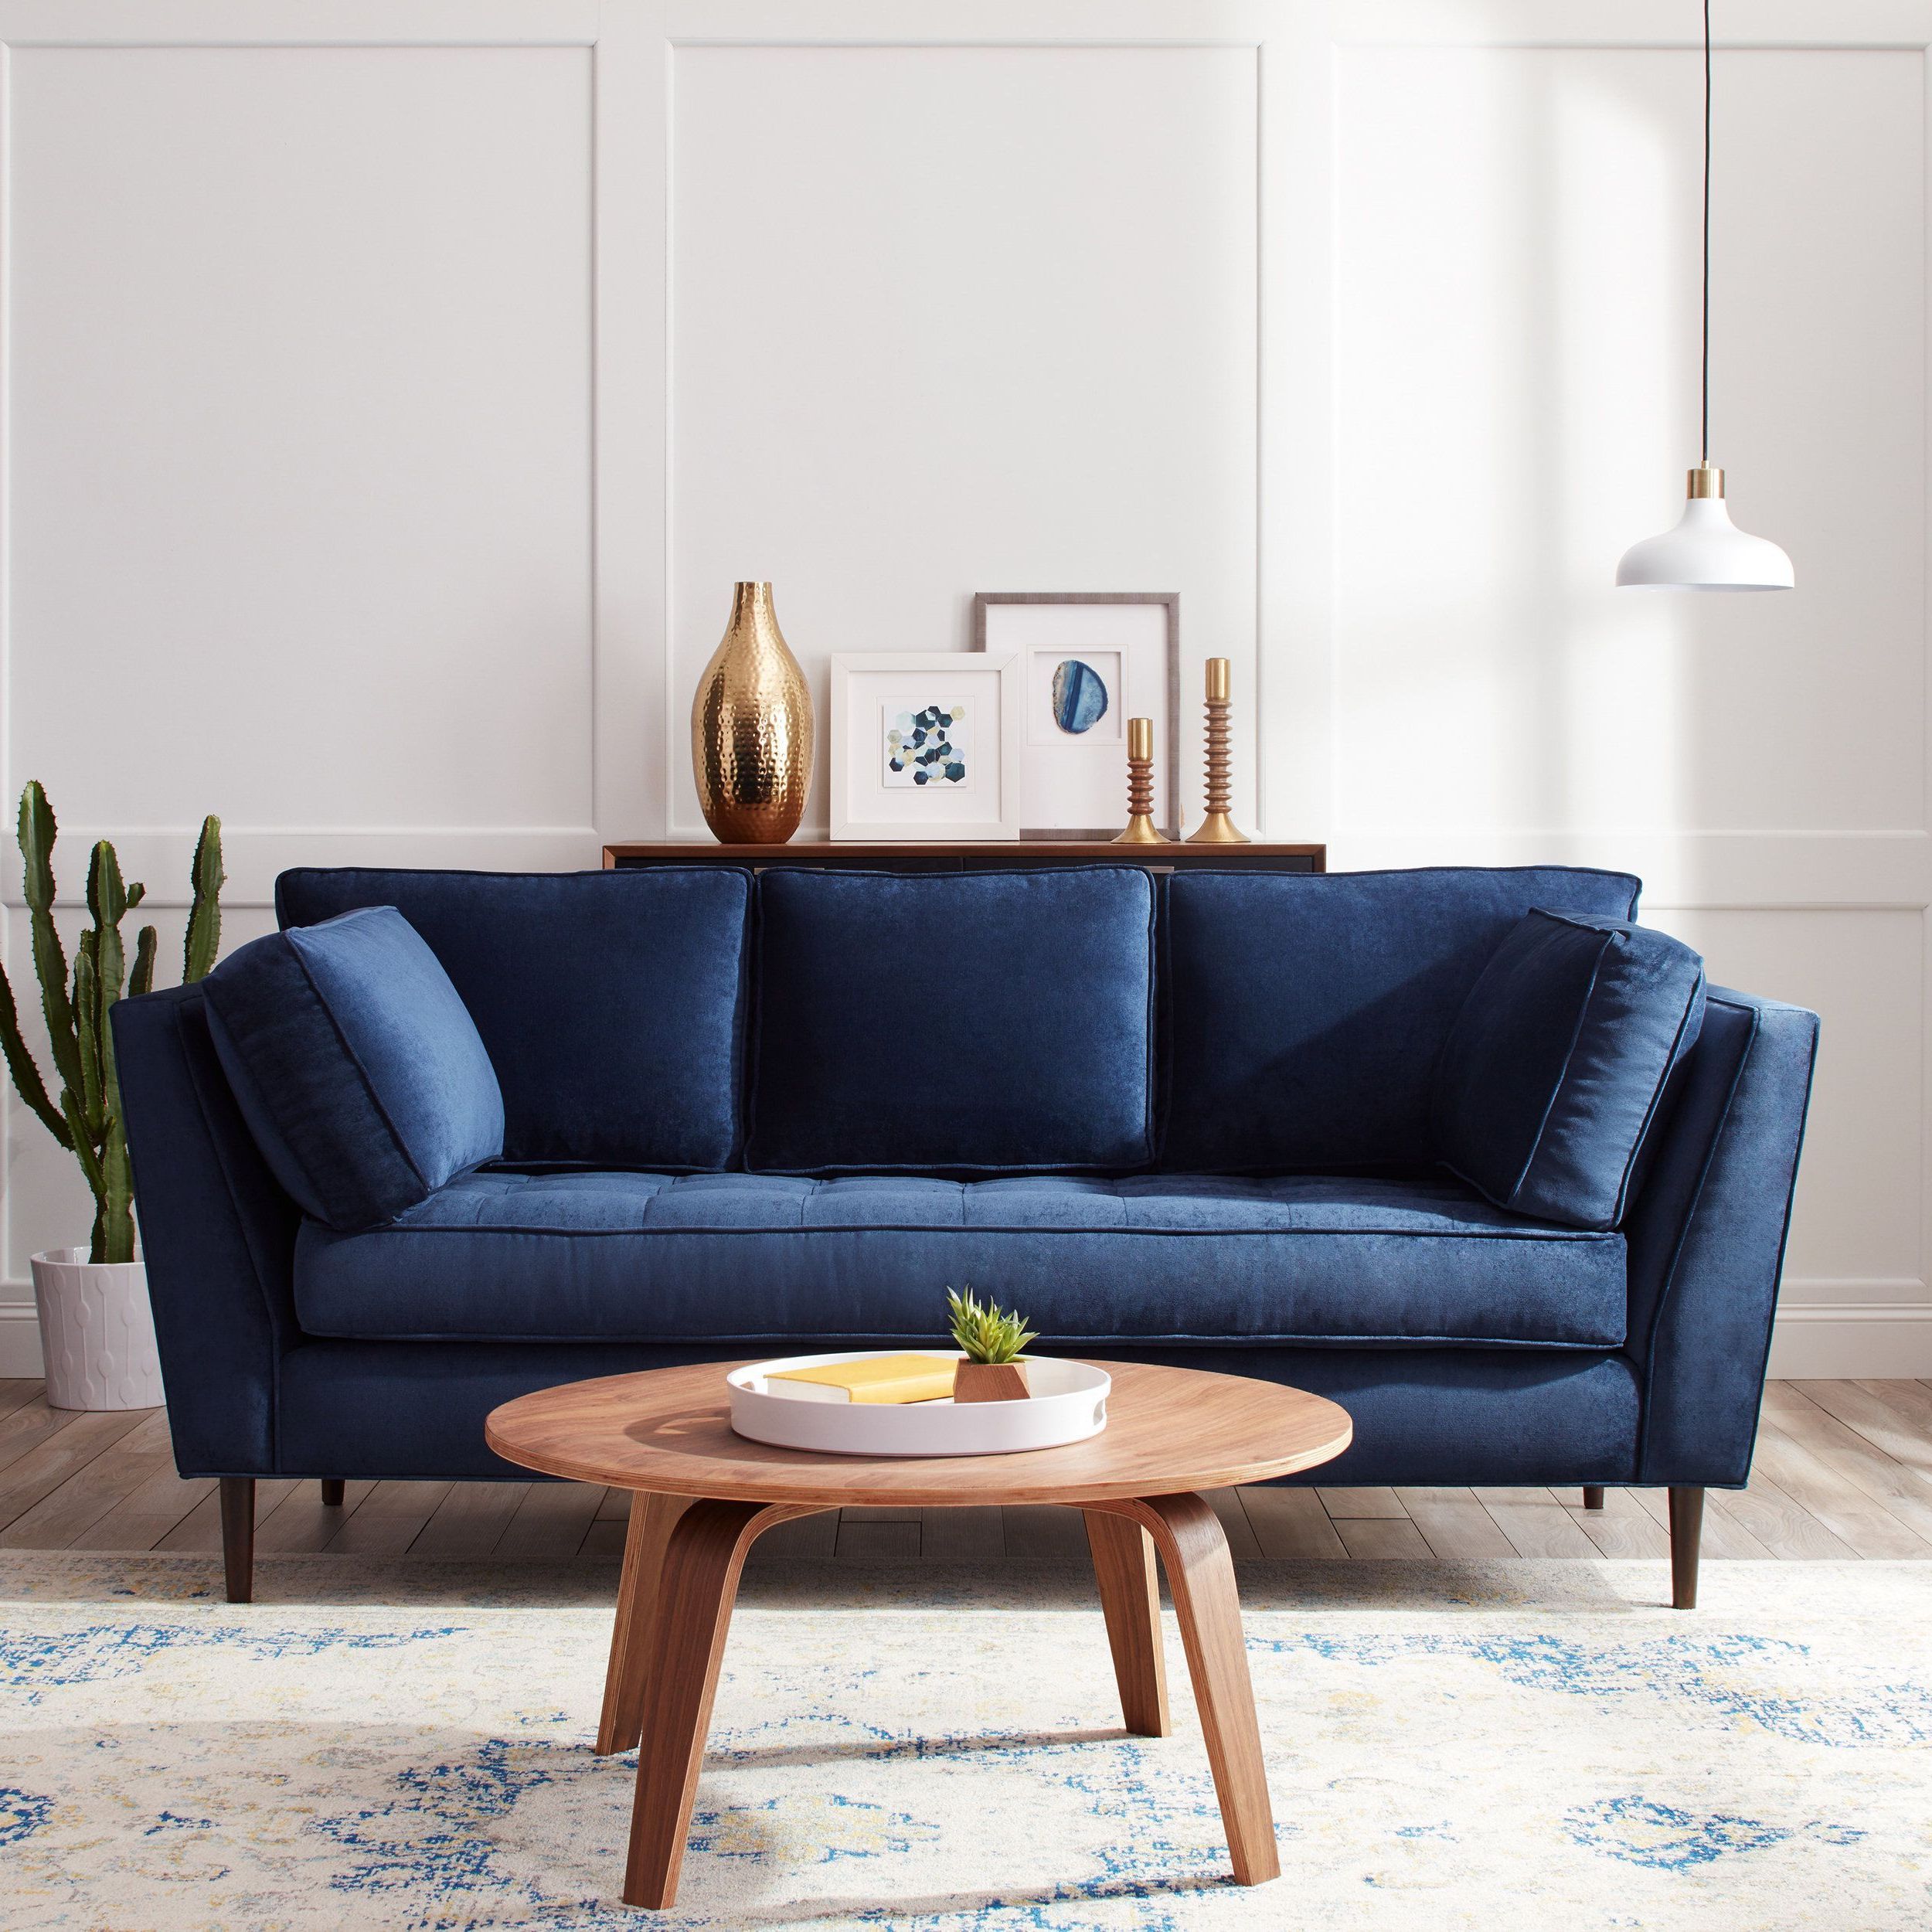 Our Best Living Room Furniture Deals | Blue Sofa Living, Blue Couch Within Sofas In Blue (Gallery 3 of 20)